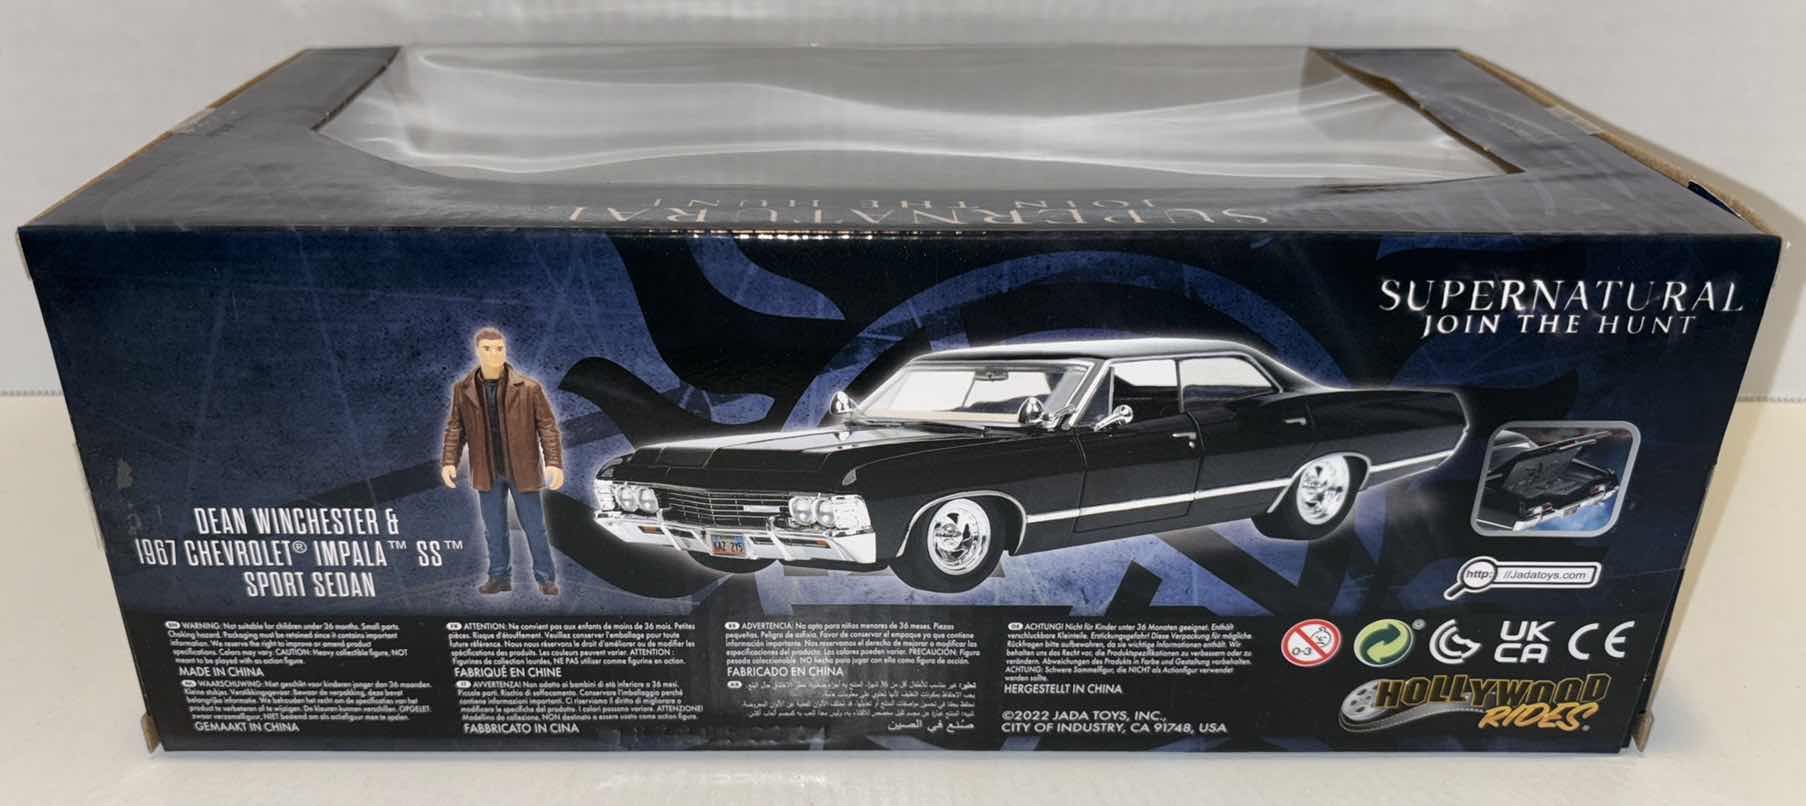 Photo 4 of NEW JADA TOYS HOLLYWOOD RIDES SUPERNATURAL JOIN THE HUNT DIE-CAST VEHICLE & FIGURE 2-PACK, “DEAN WINCHESTER & 1967 CHEVROLET IMPALA SS SPORT SEDAN”